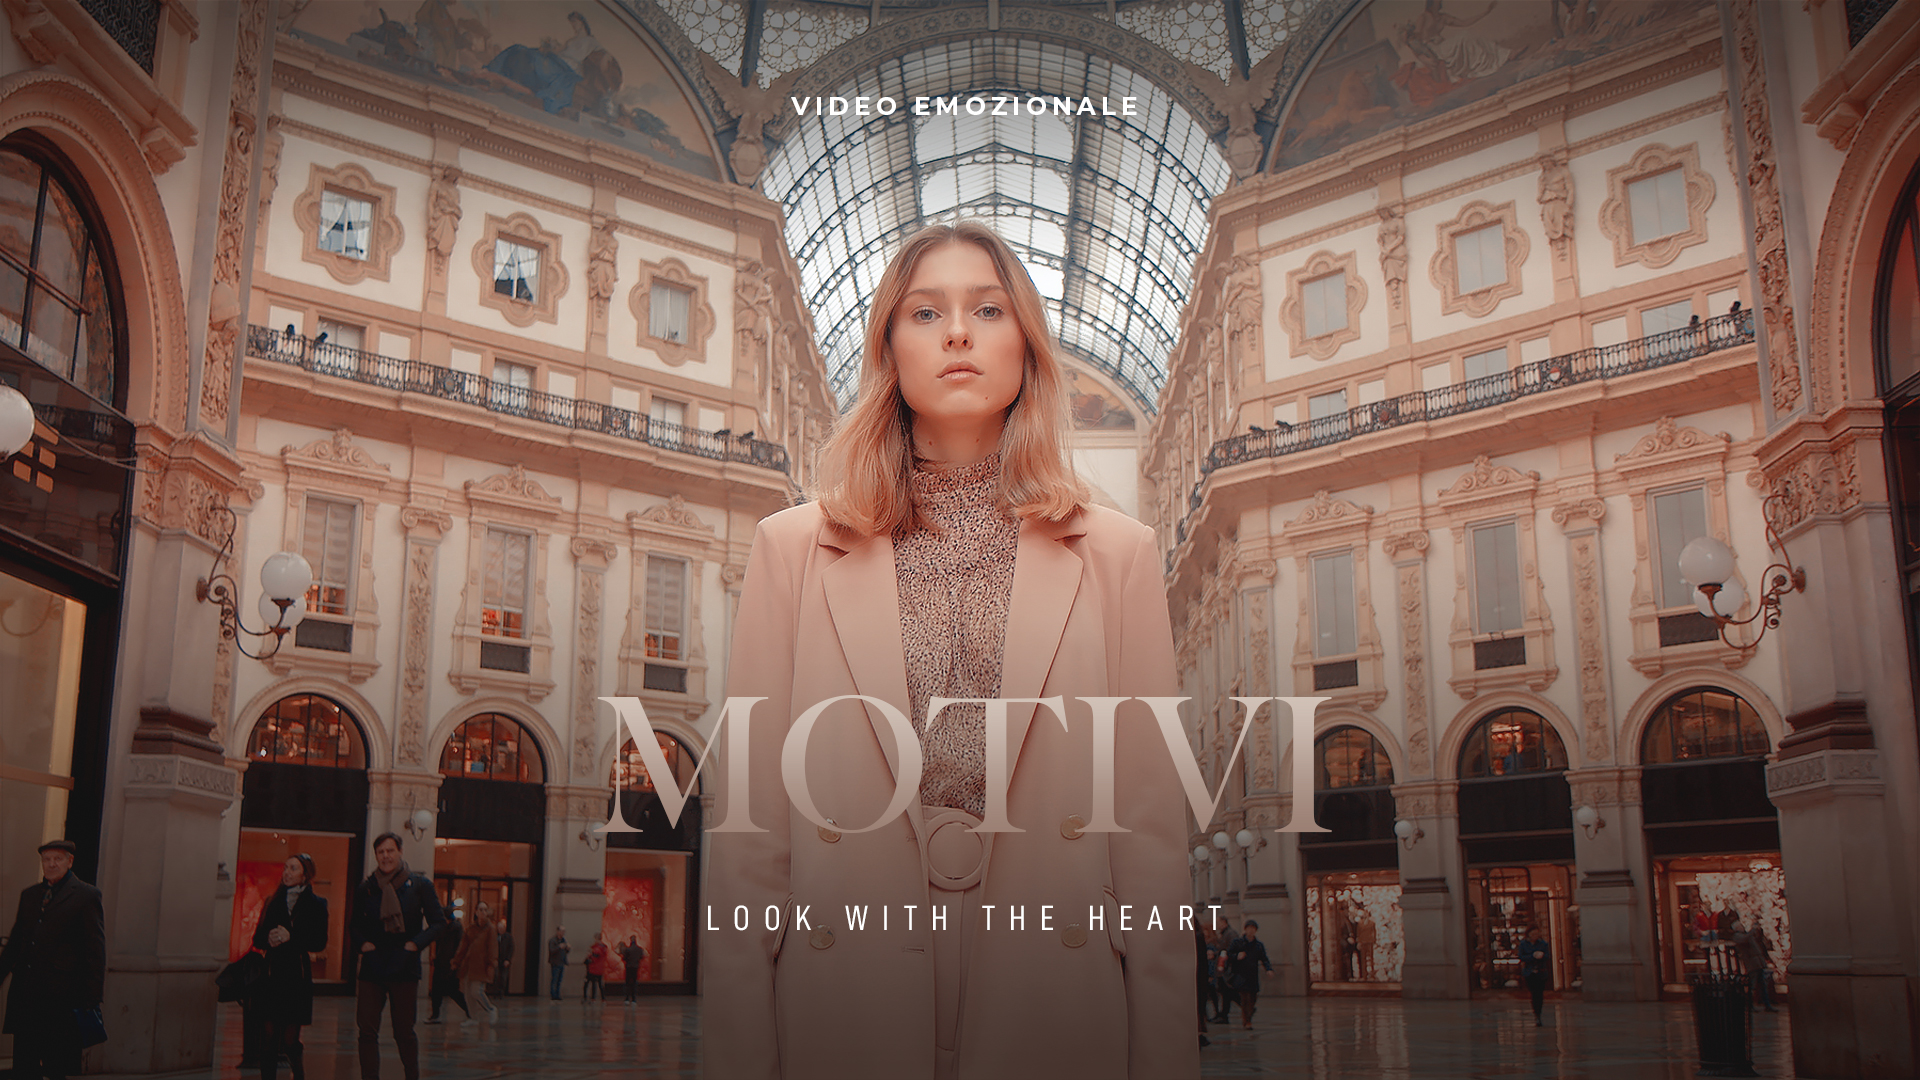 Motivi – Look with the heart